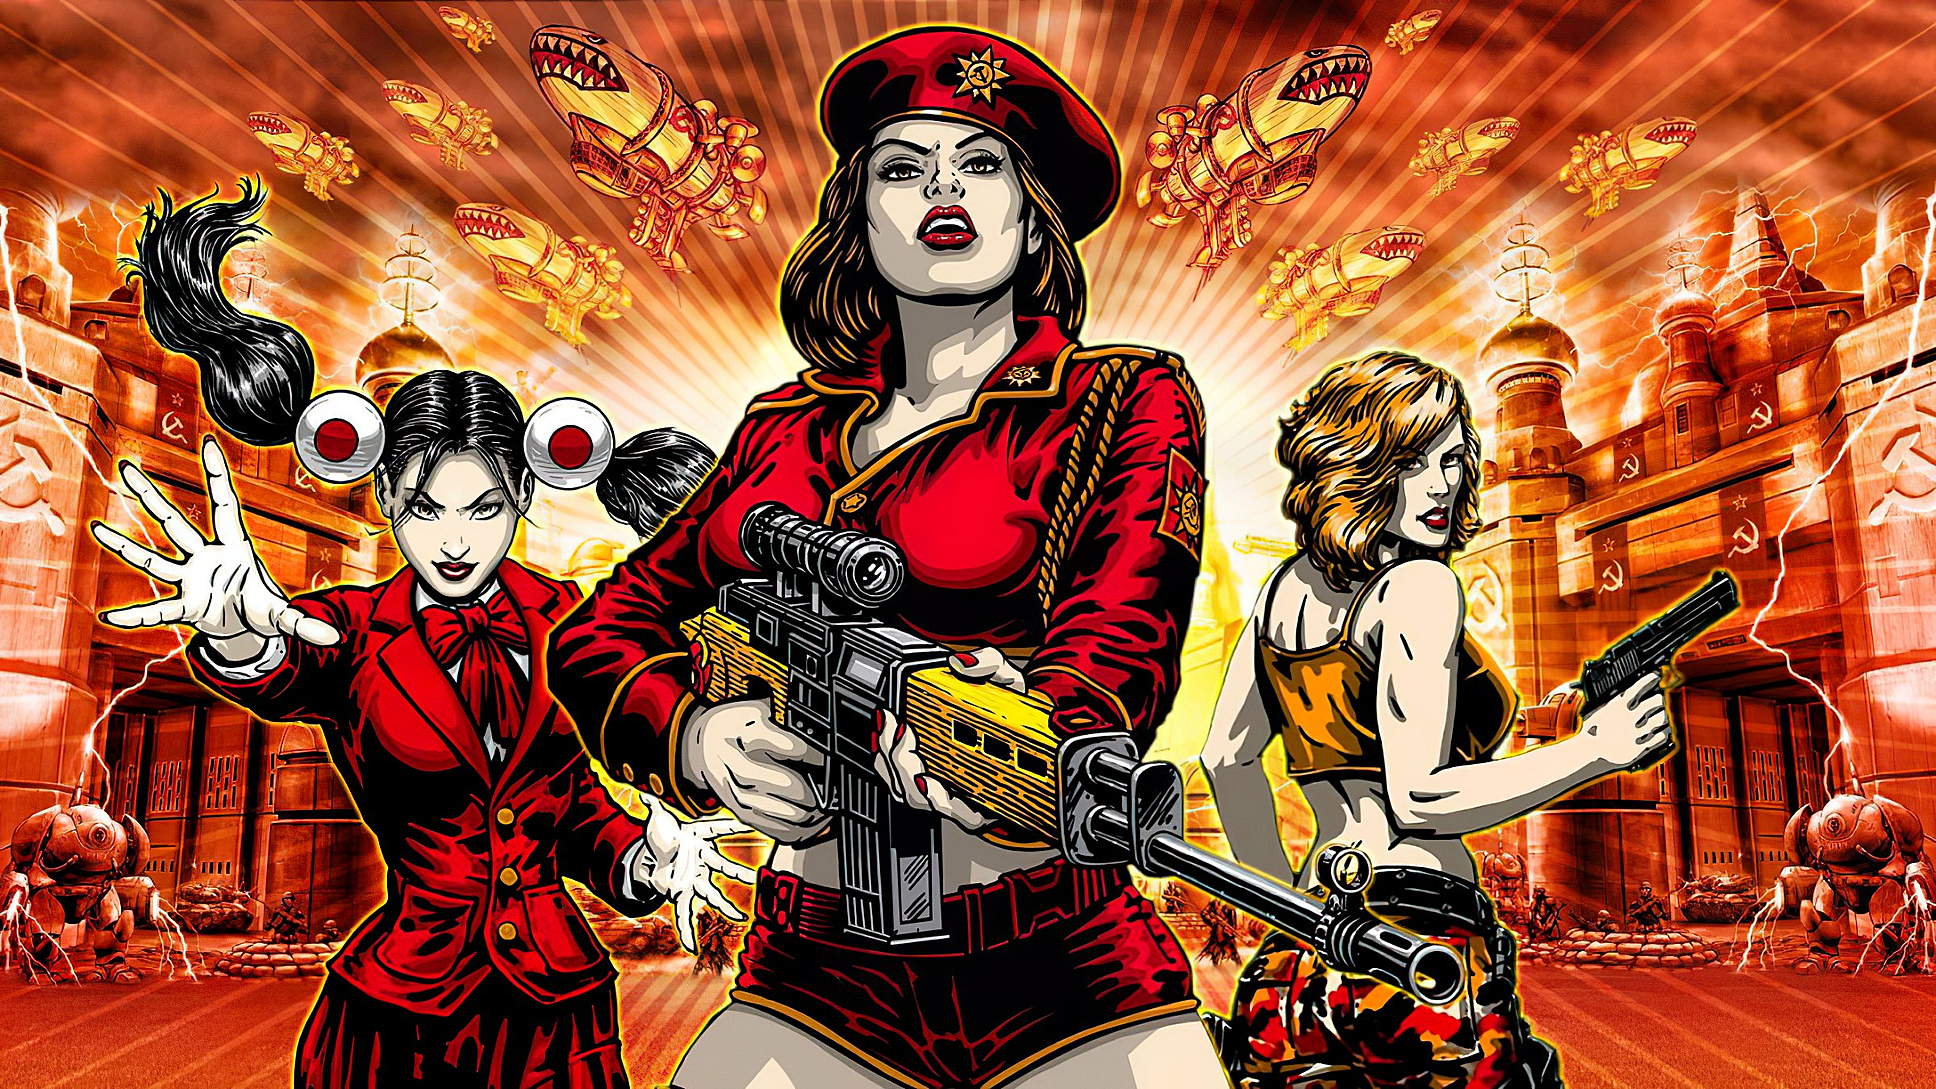 download command & conquer red alert 2